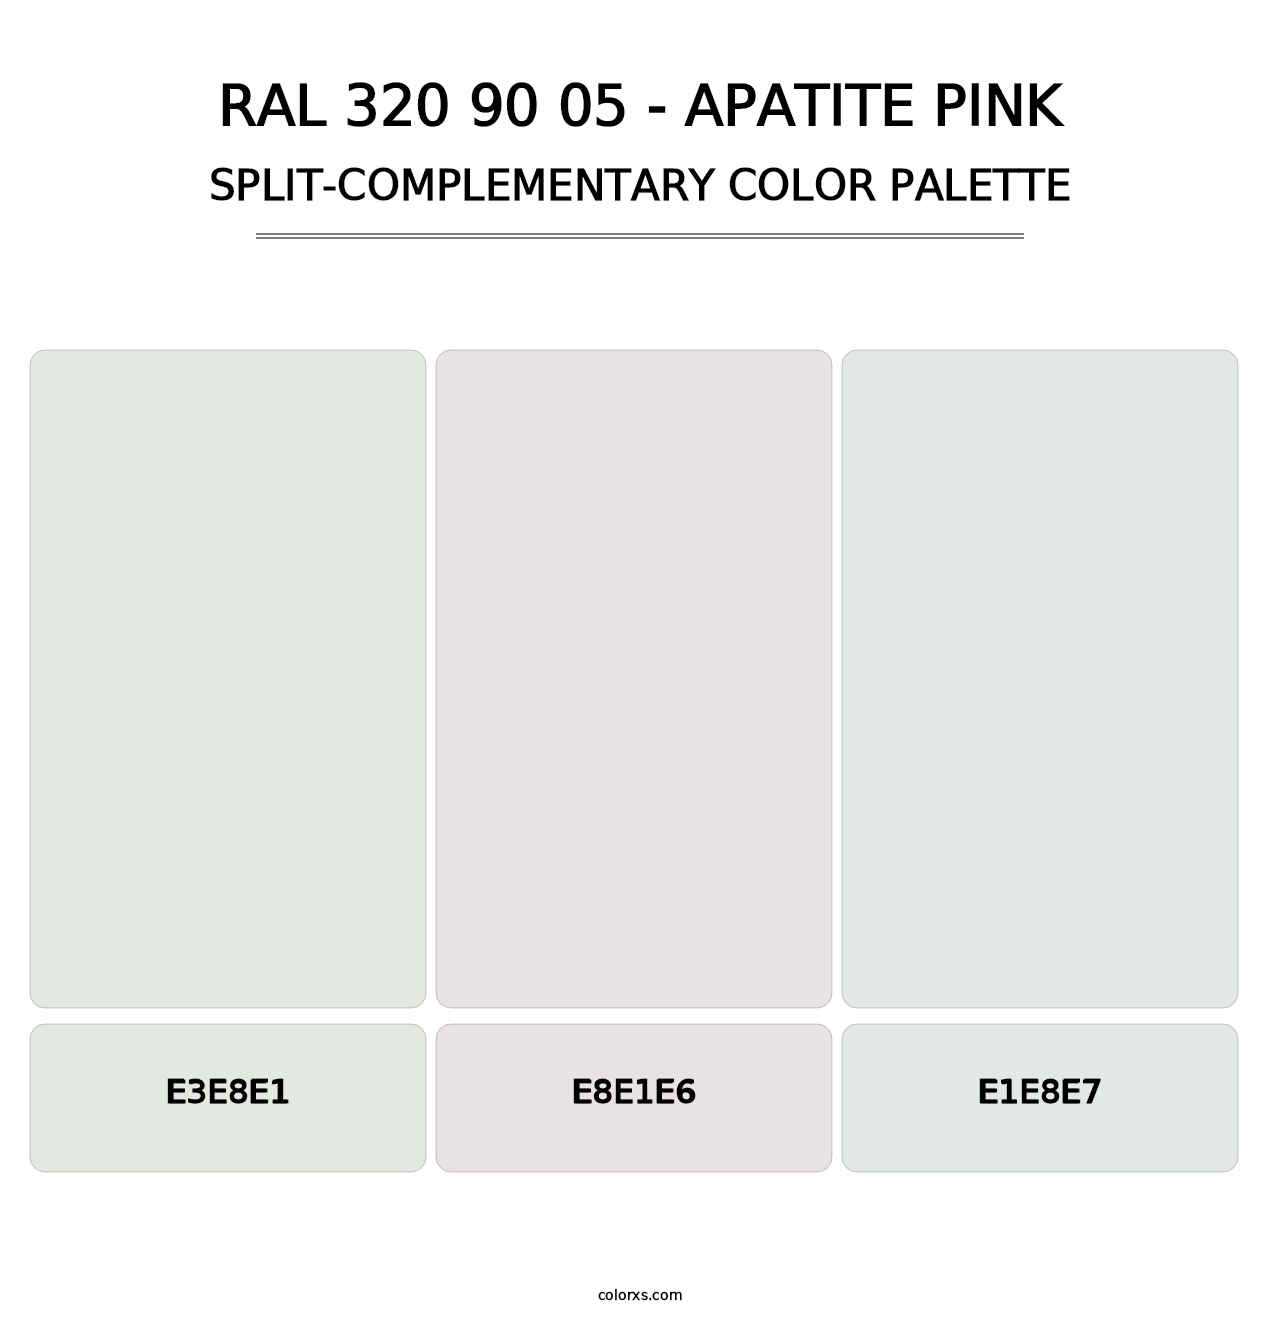 RAL 320 90 05 - Apatite Pink - Split-Complementary Color Palette